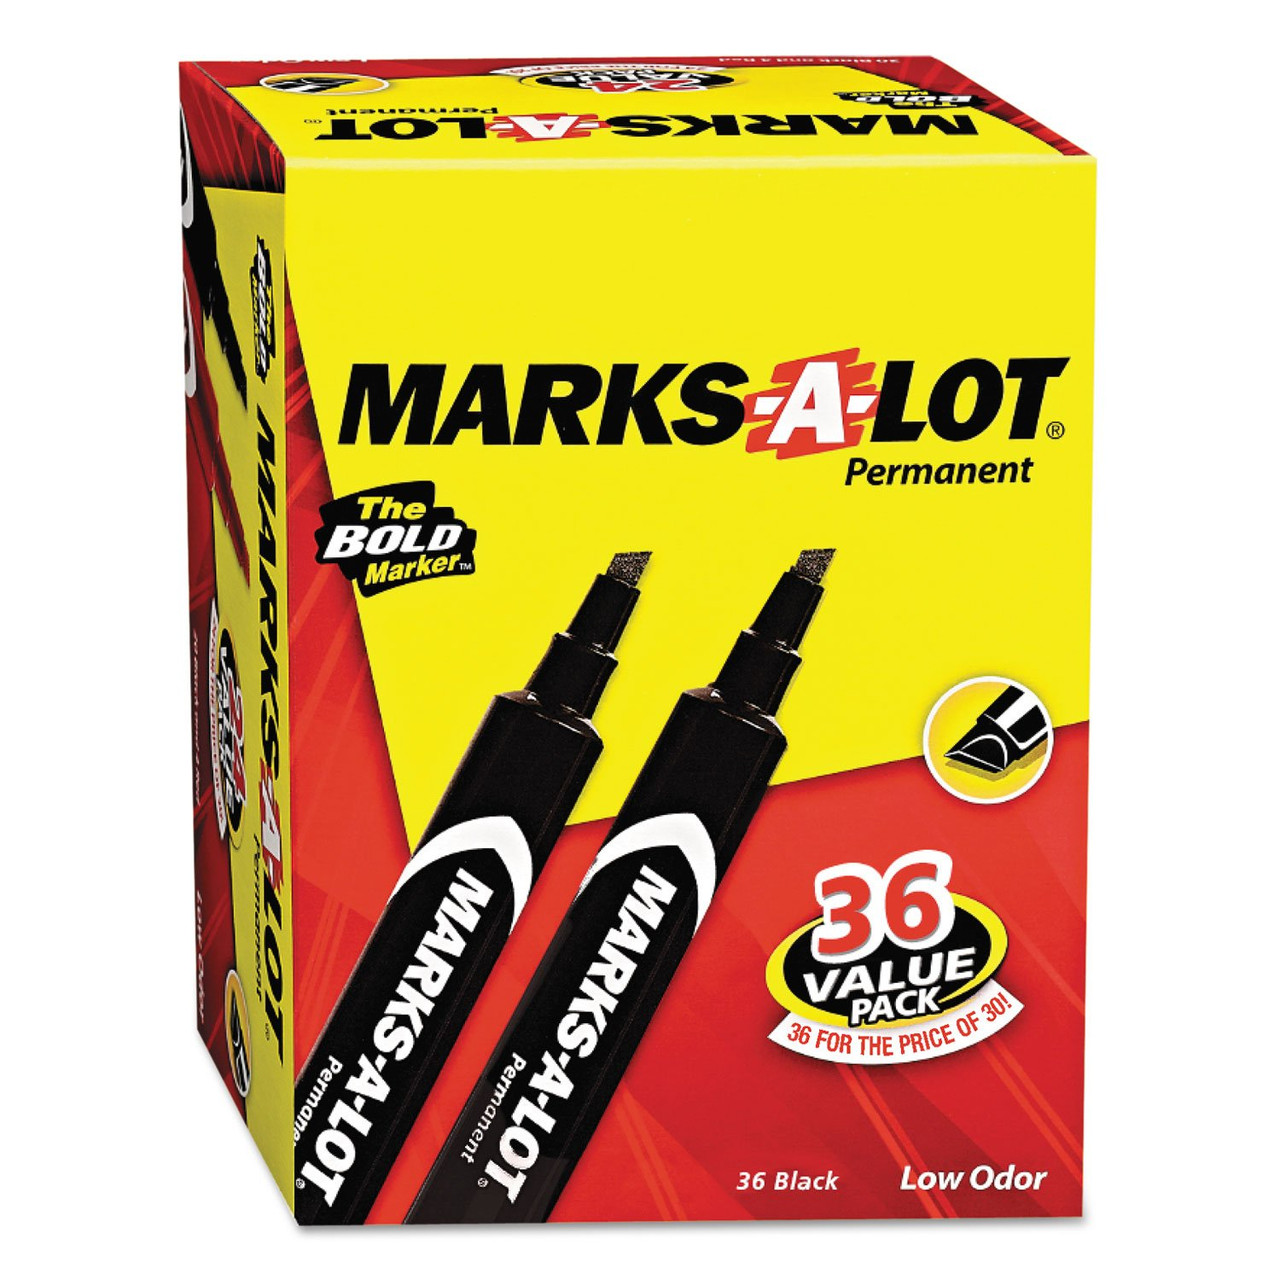 Marks-A-Lot Permanent Marker (ave-98206)